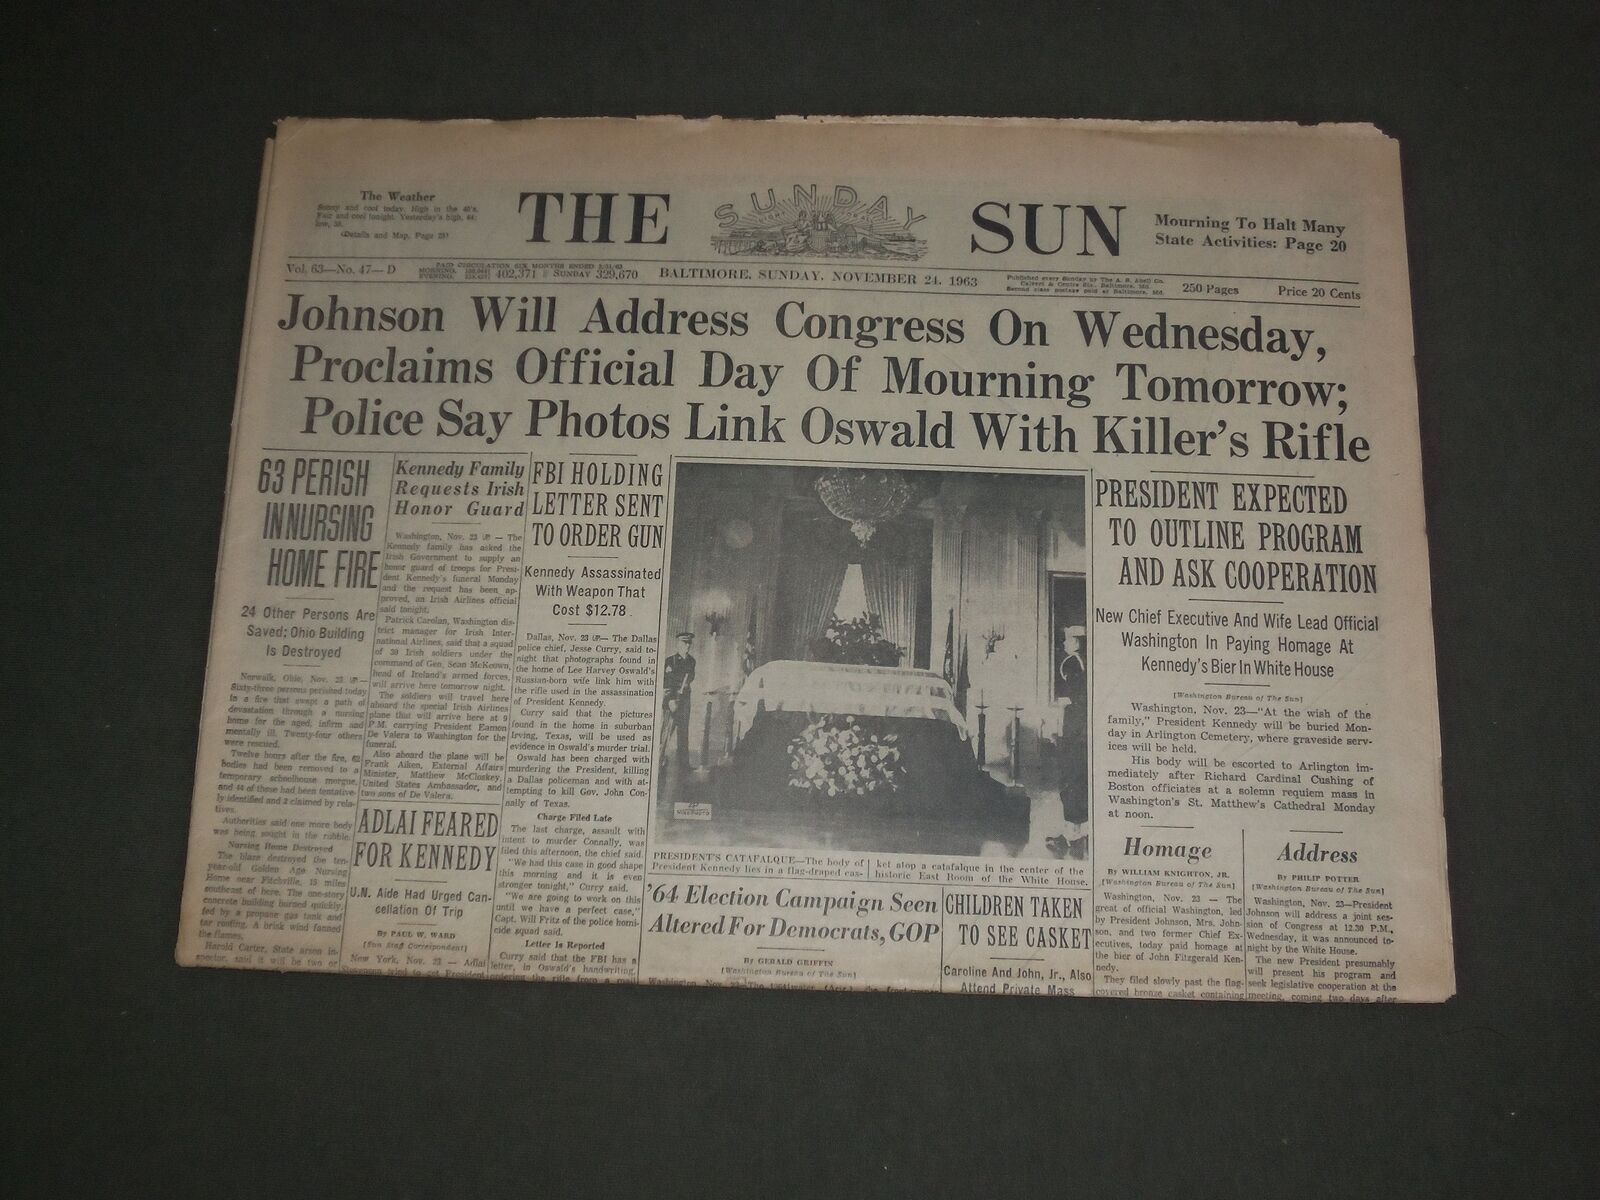 1963 NOVEMBER 23 THE BALTIMORE SUN - OFFICIAL DAY OF MOURNING FOR JFK - NP 2947